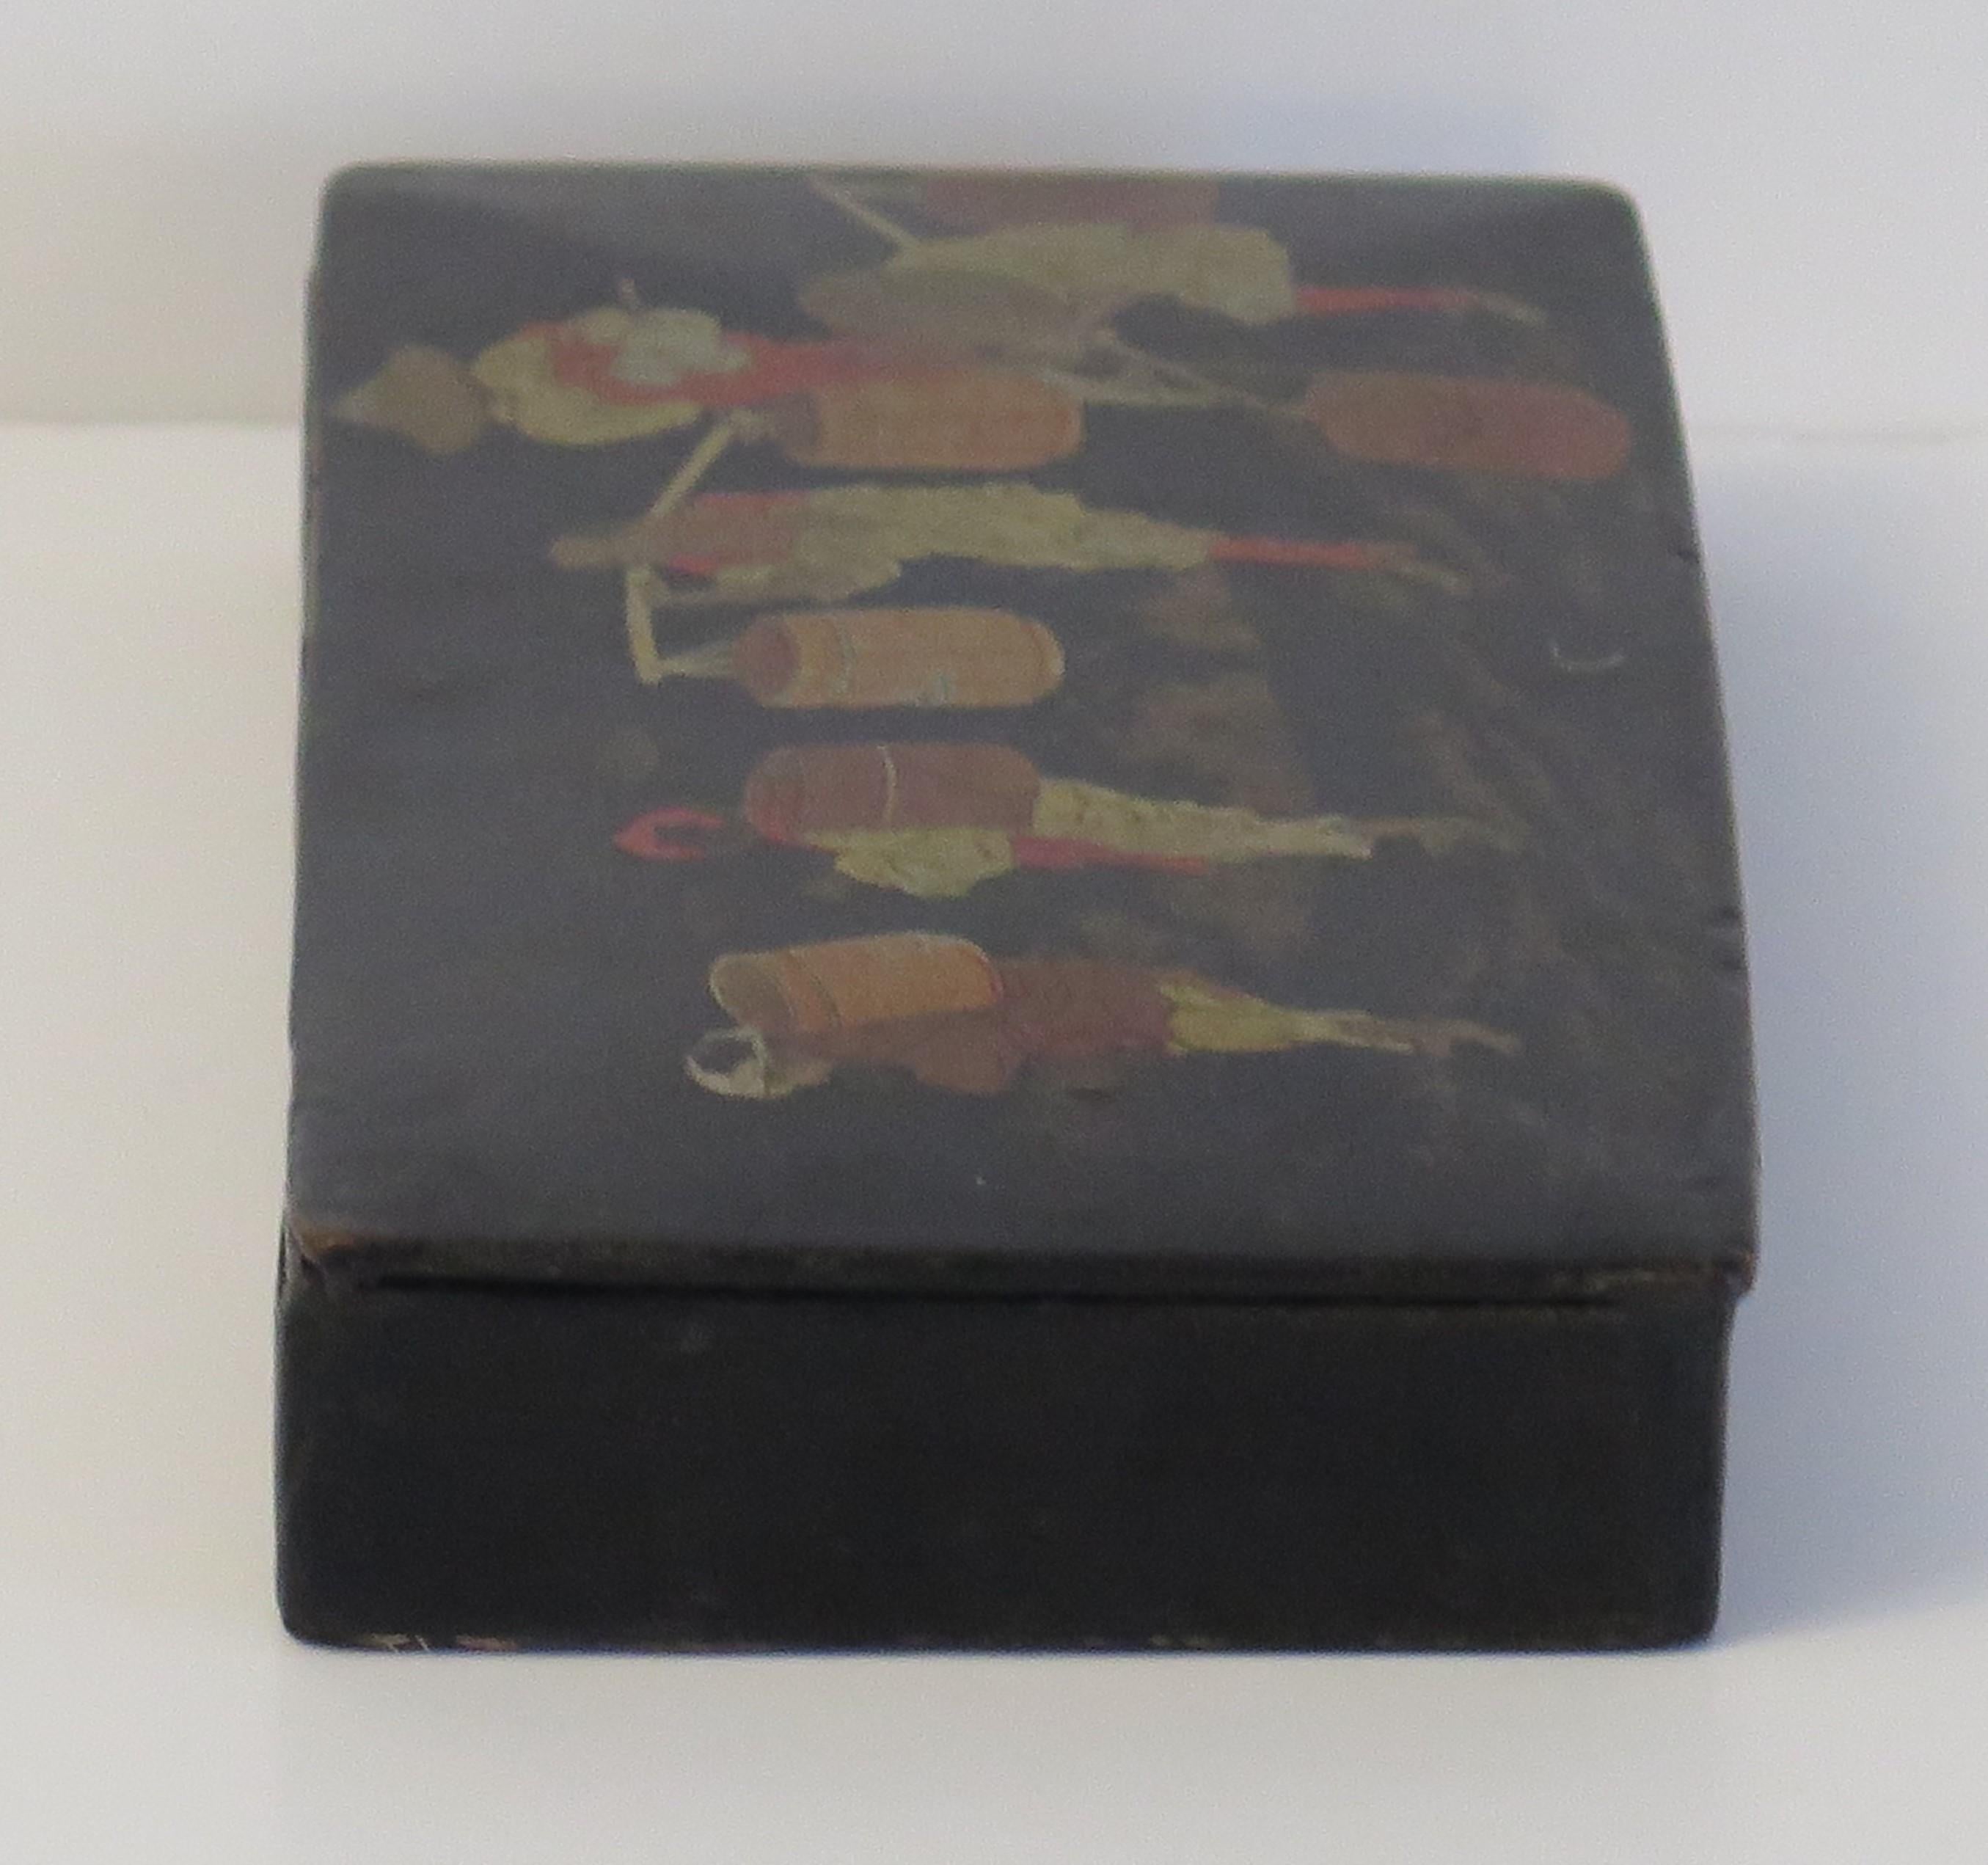 Lacquered Japanese Laquered Box with Hinged Lid Hand Painted, 19th Century Meiji Period